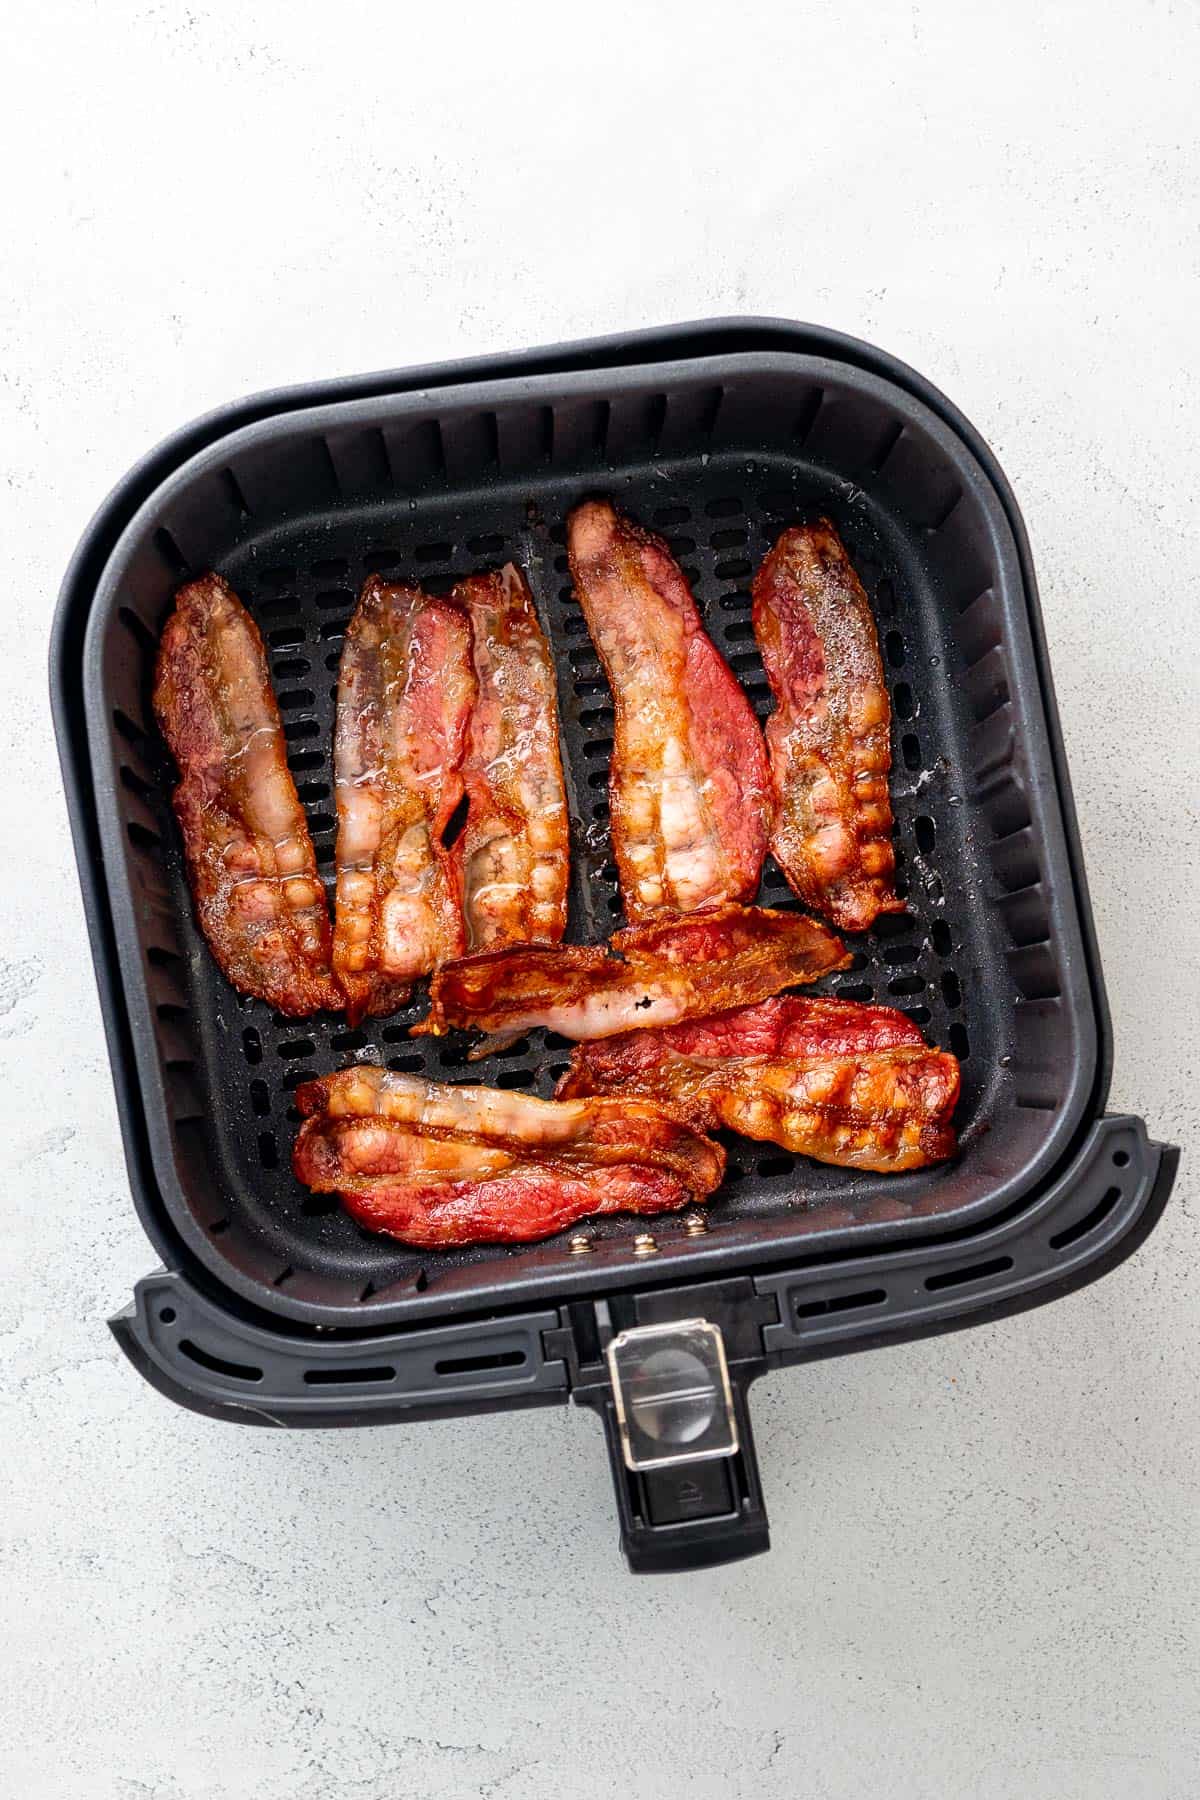 perfectly cooked strips of bacon laid out in the air fryer